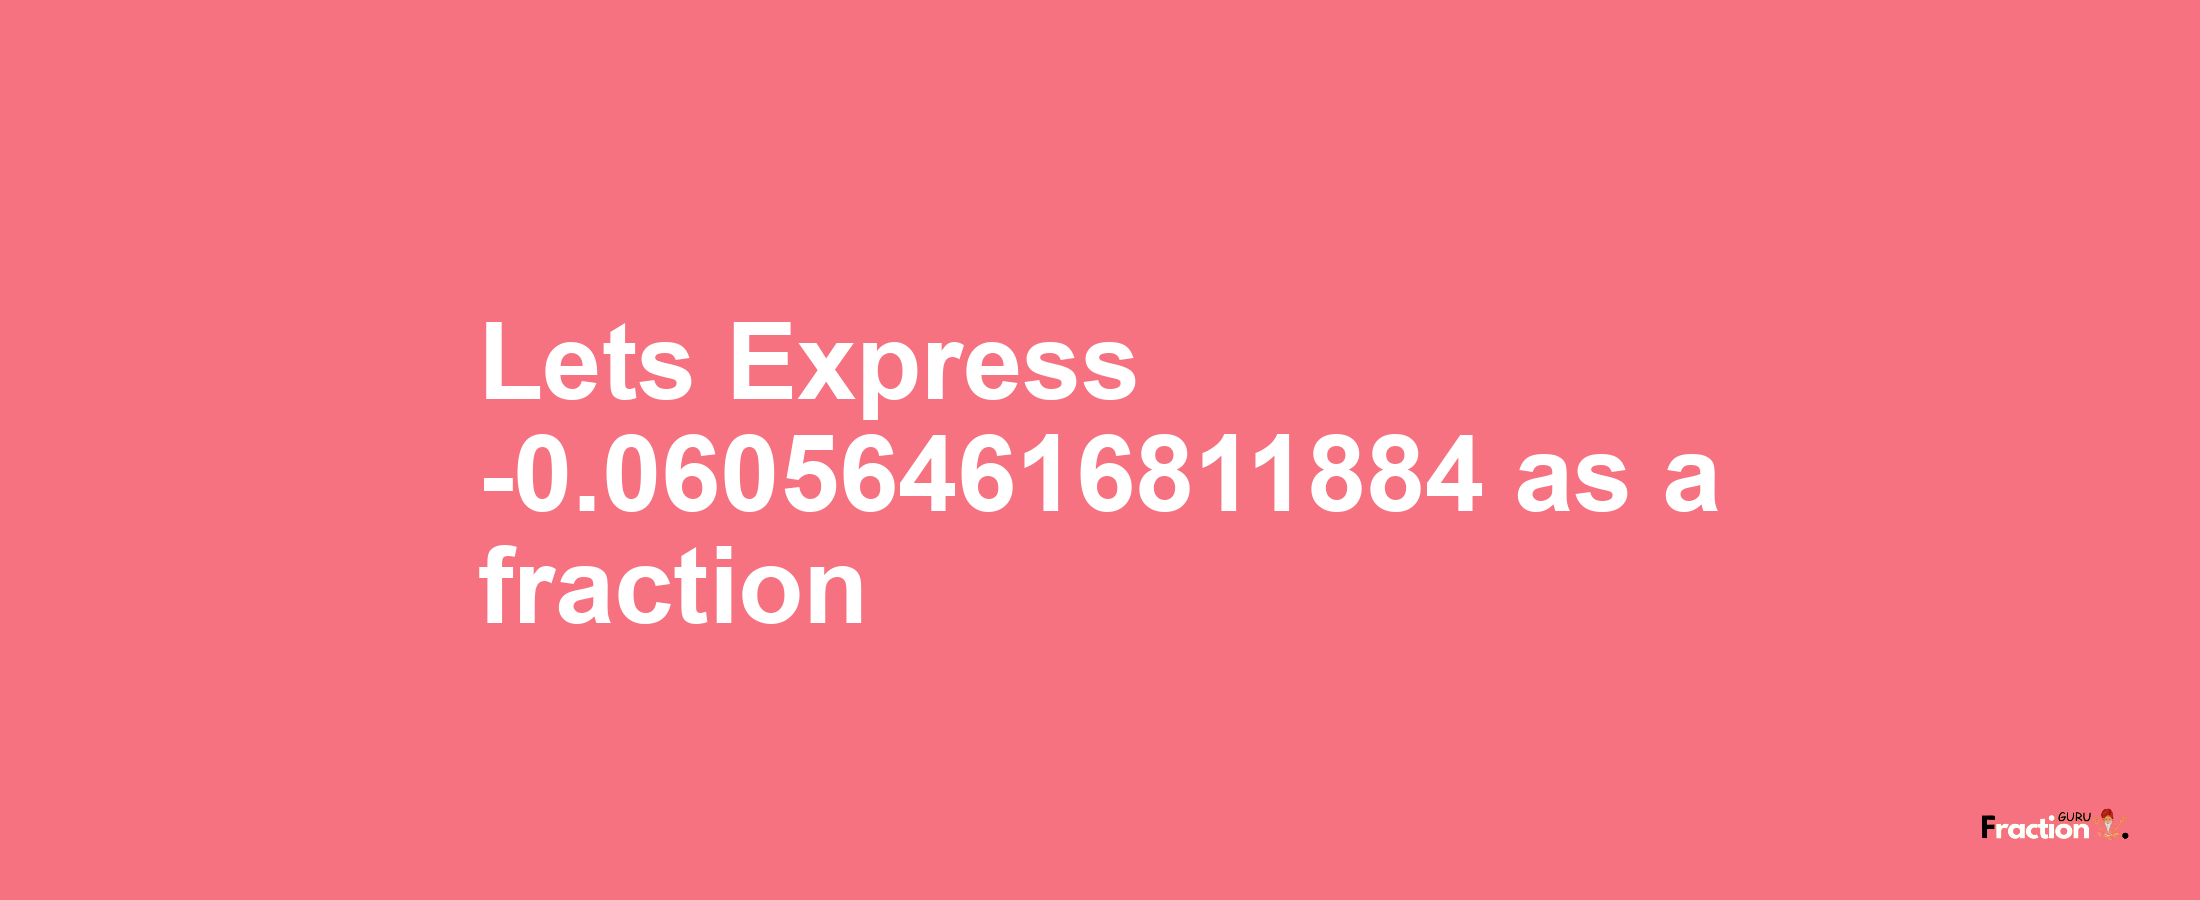 Lets Express -0.060564616811884 as afraction